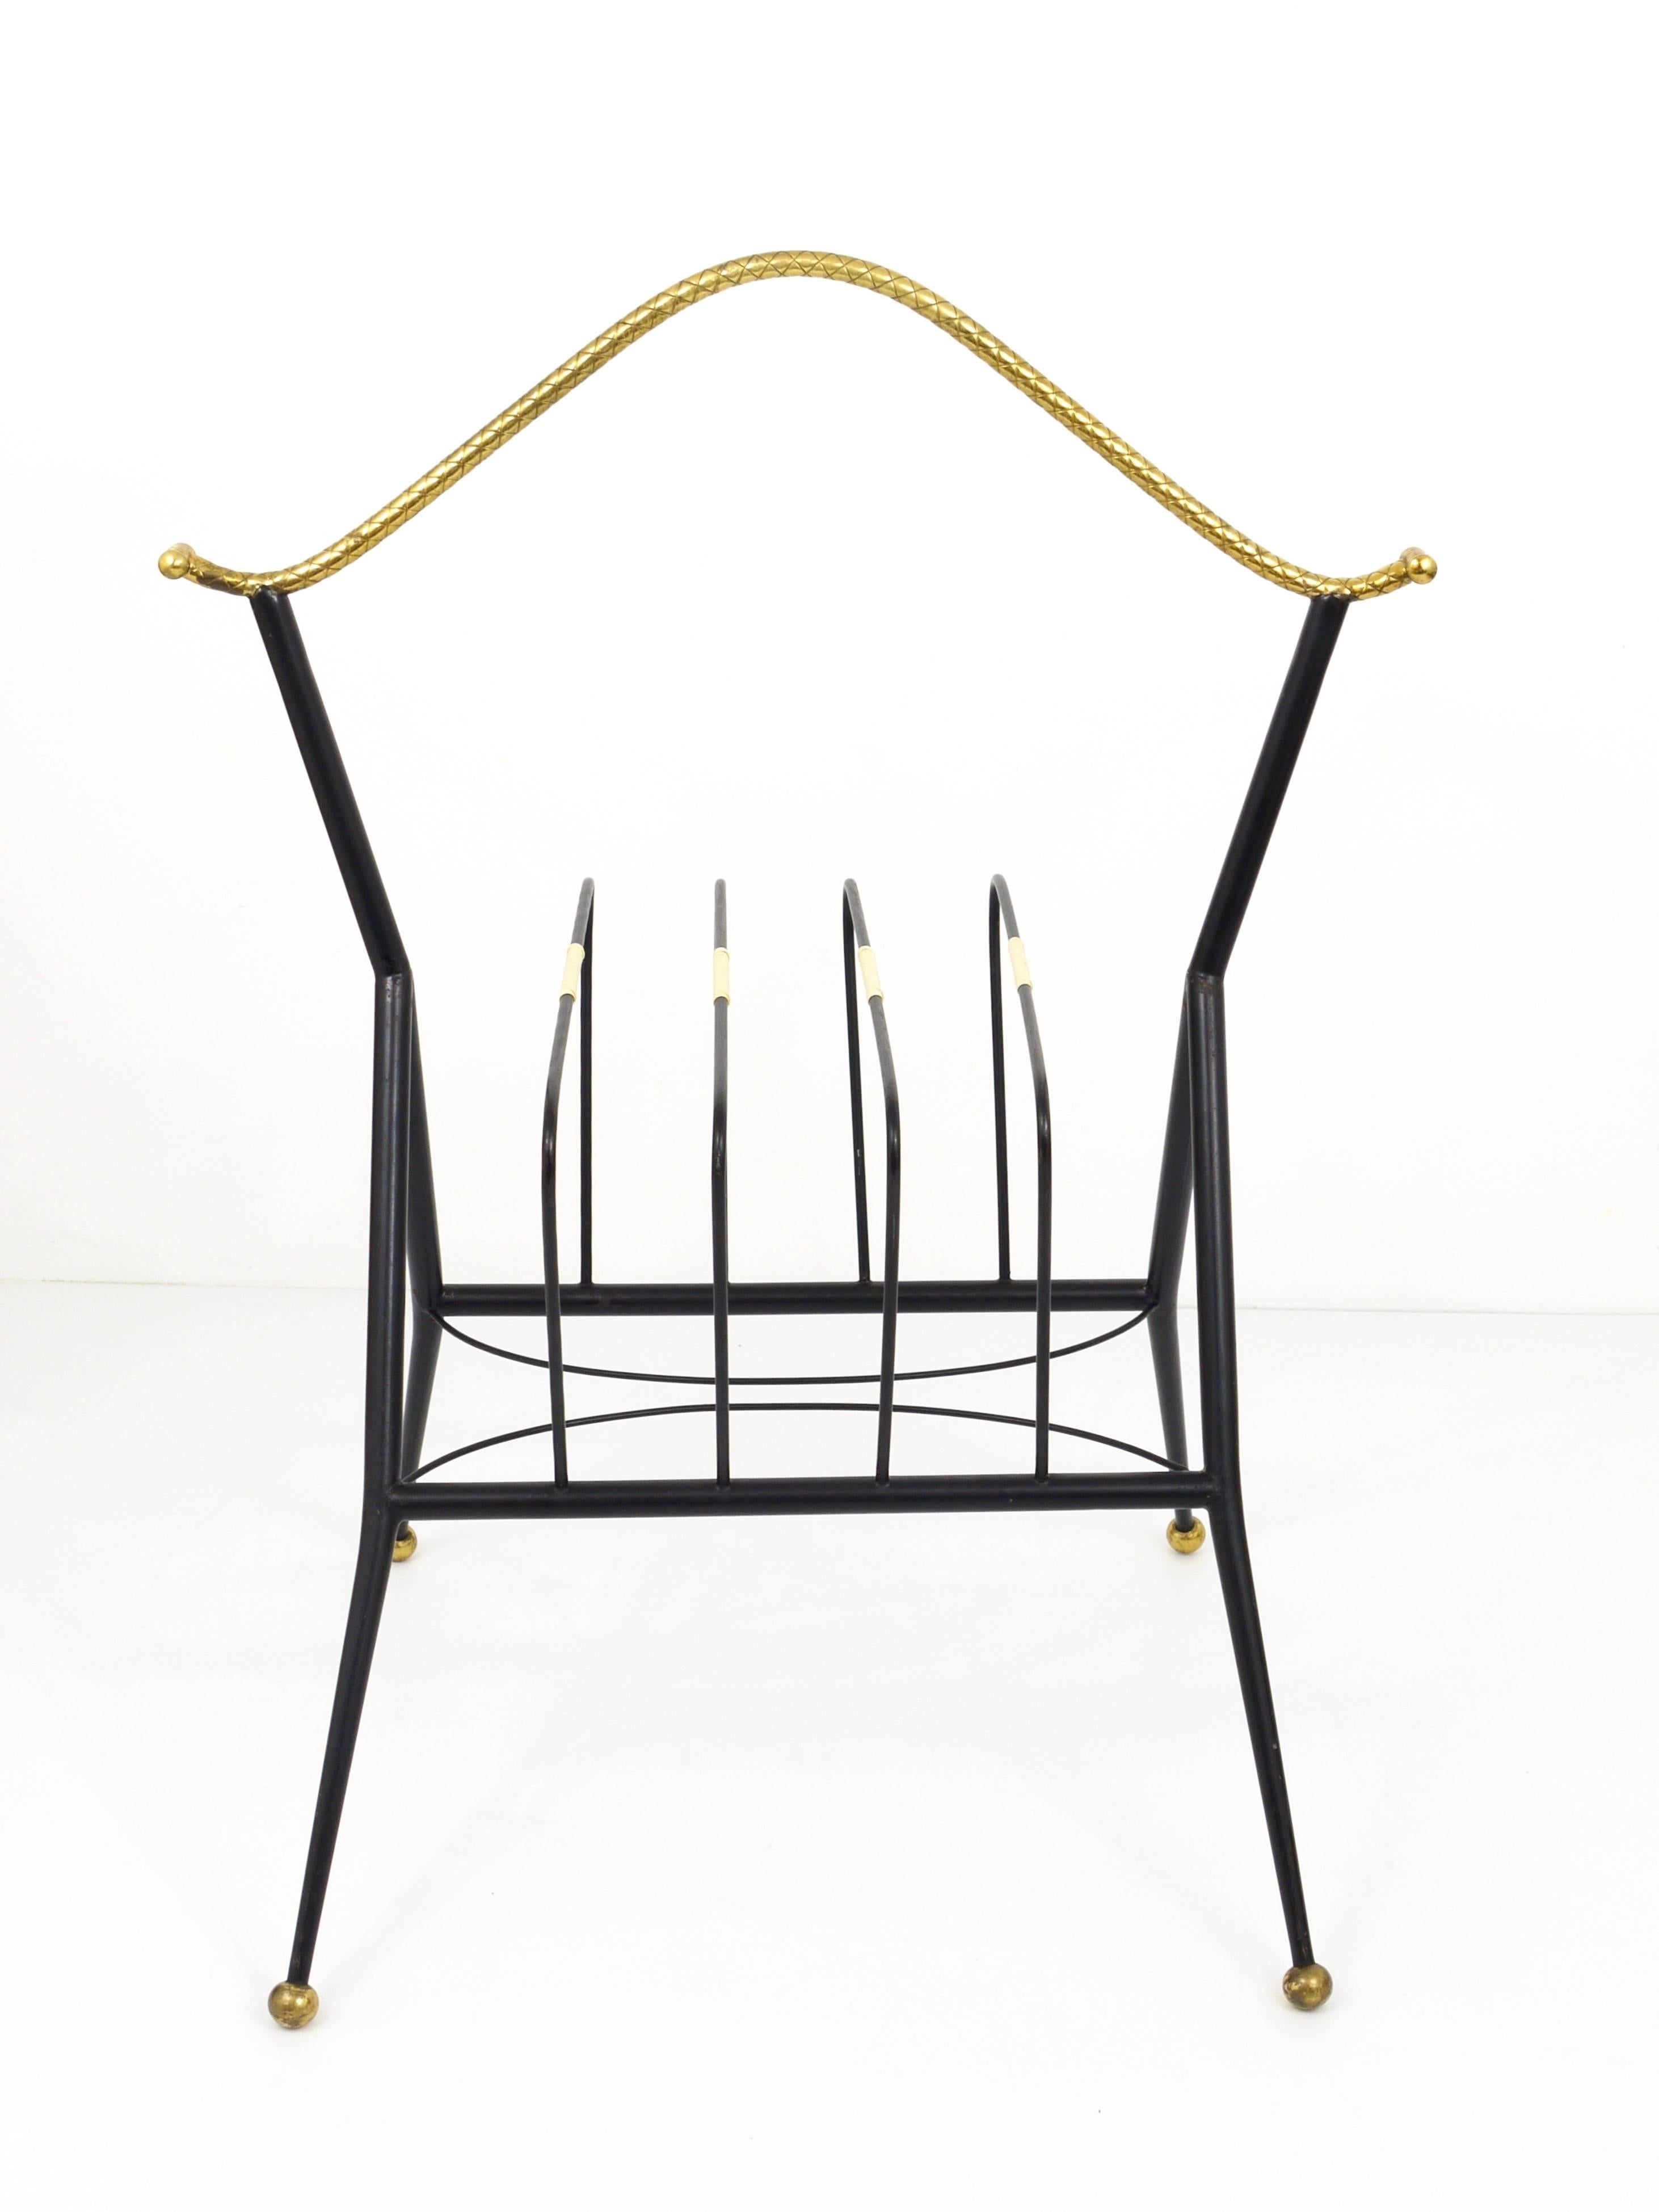 A beautiful French record rack or magazine stand from the 1950s in the manner of Maison Charles. Made of black iron with nice brass details. In very good condition.